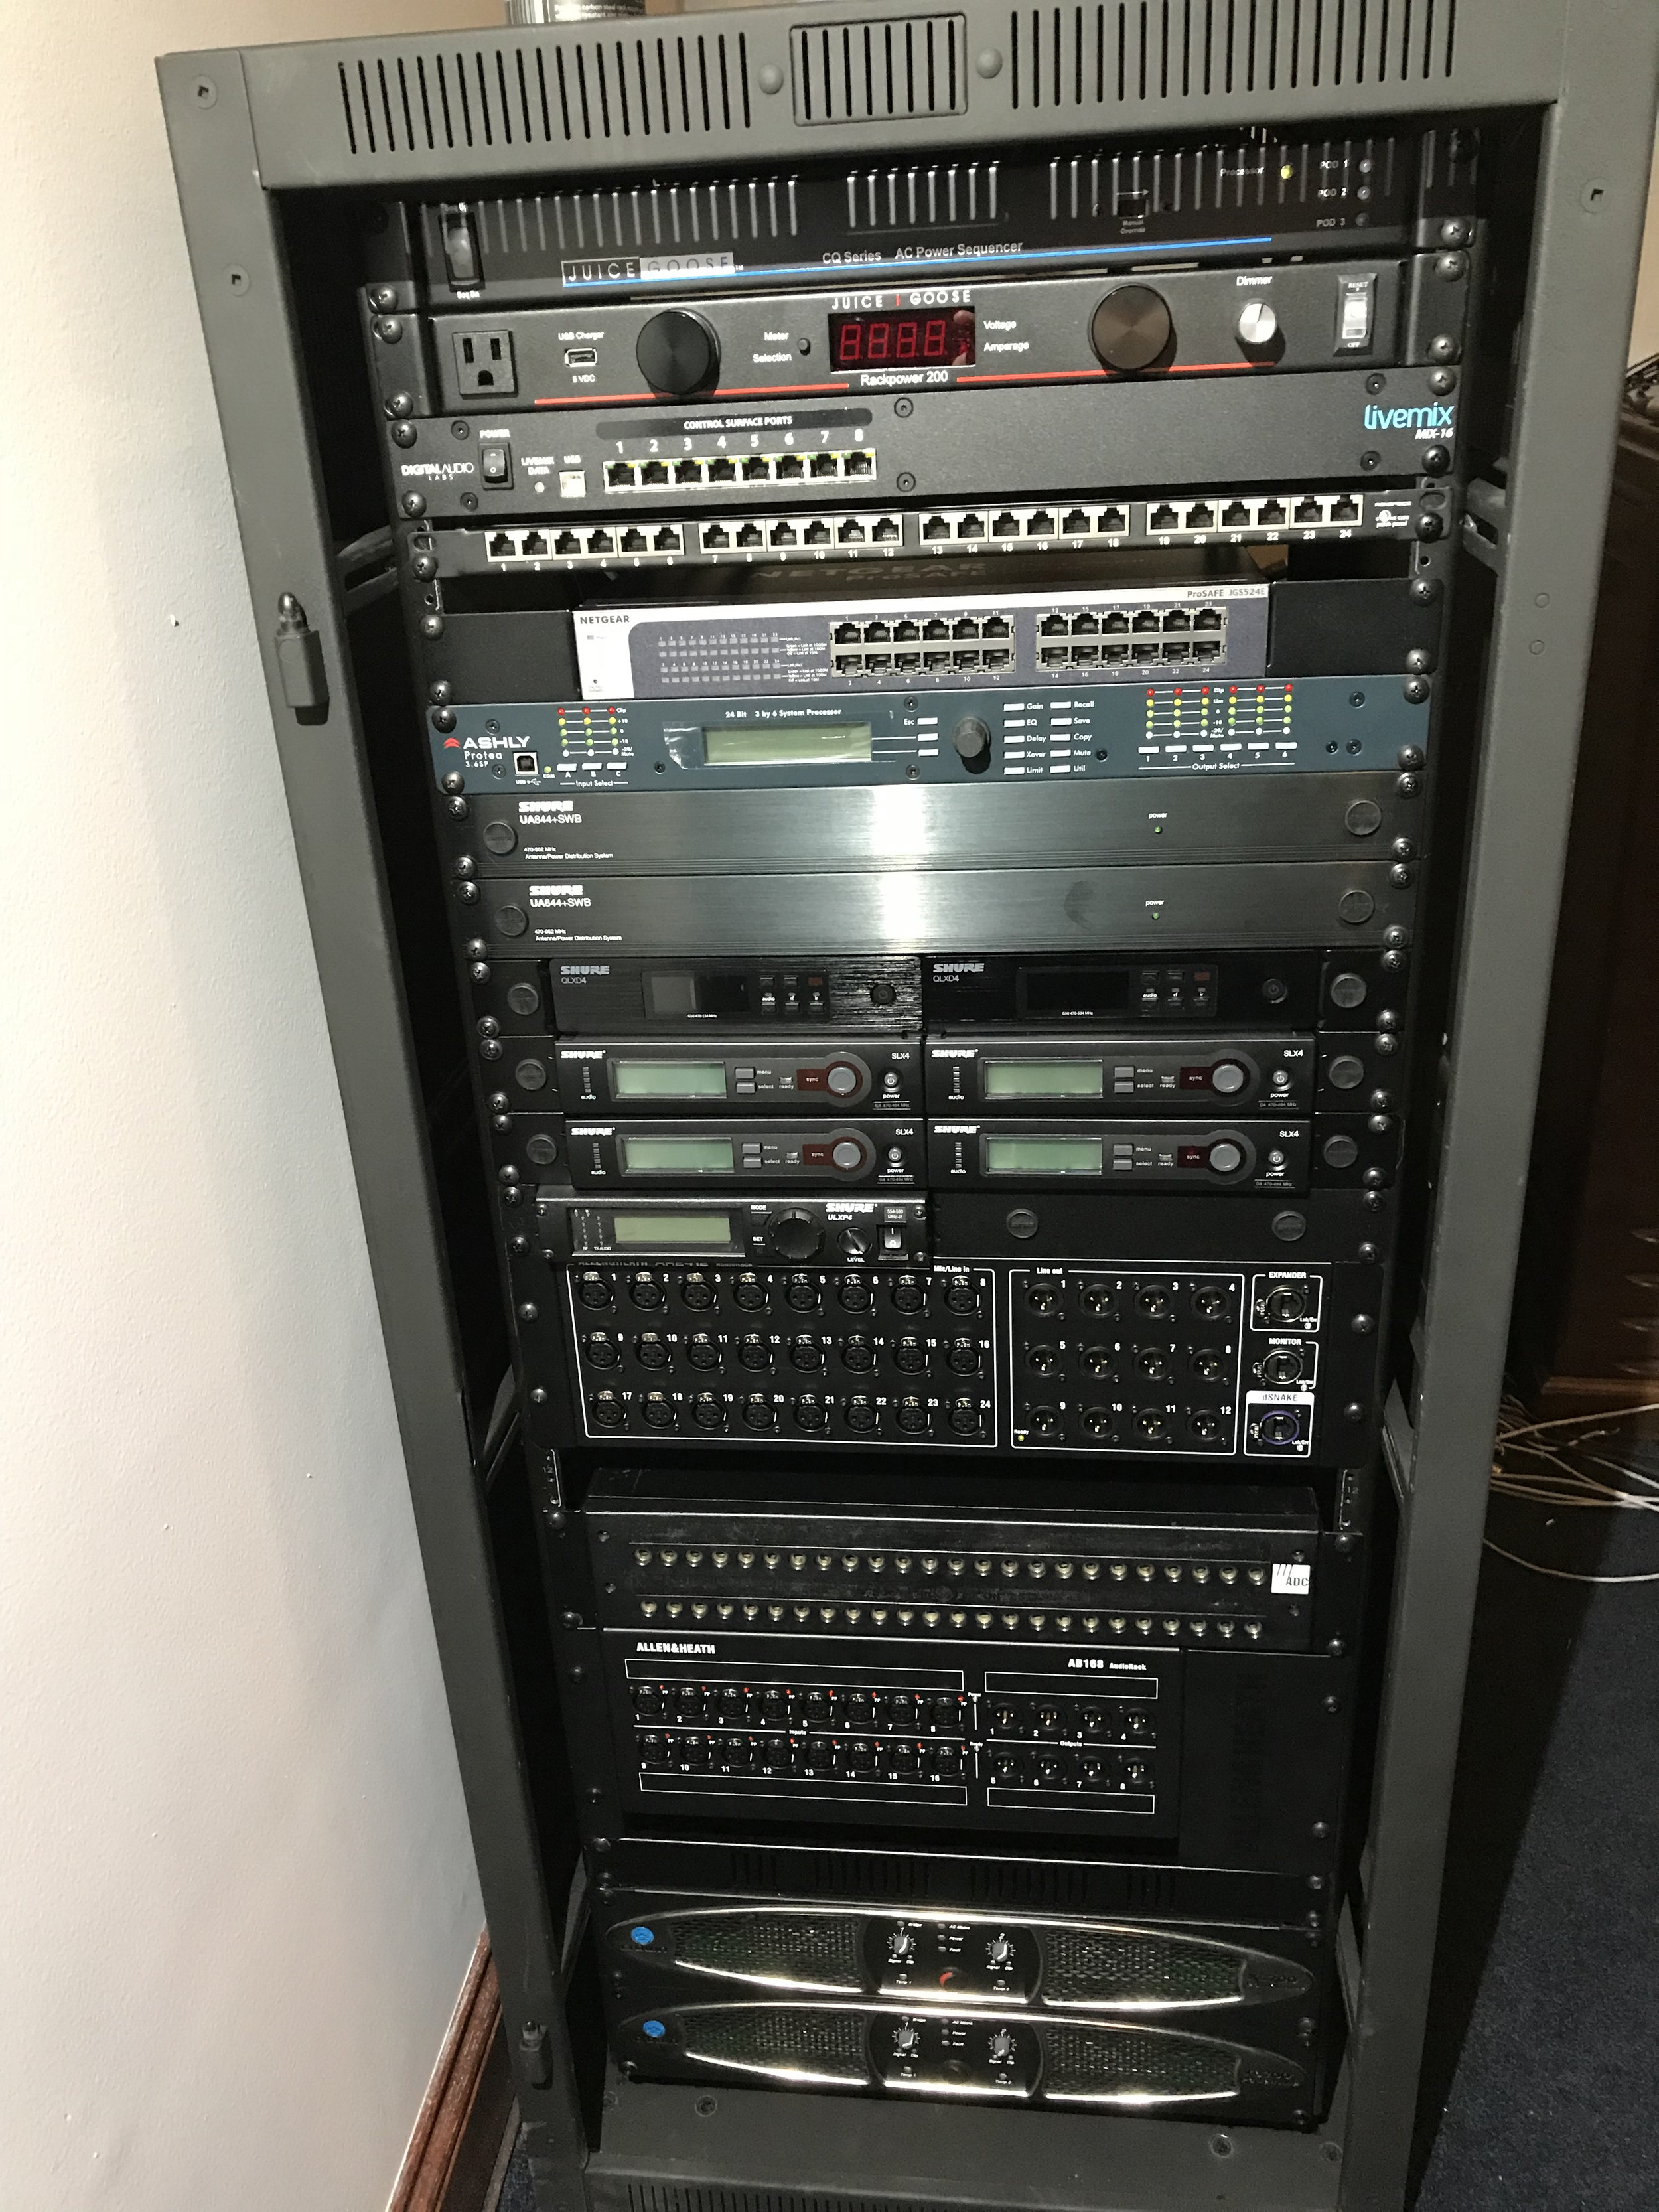 Moved wireless distro into new rack and install stage boxes/amps